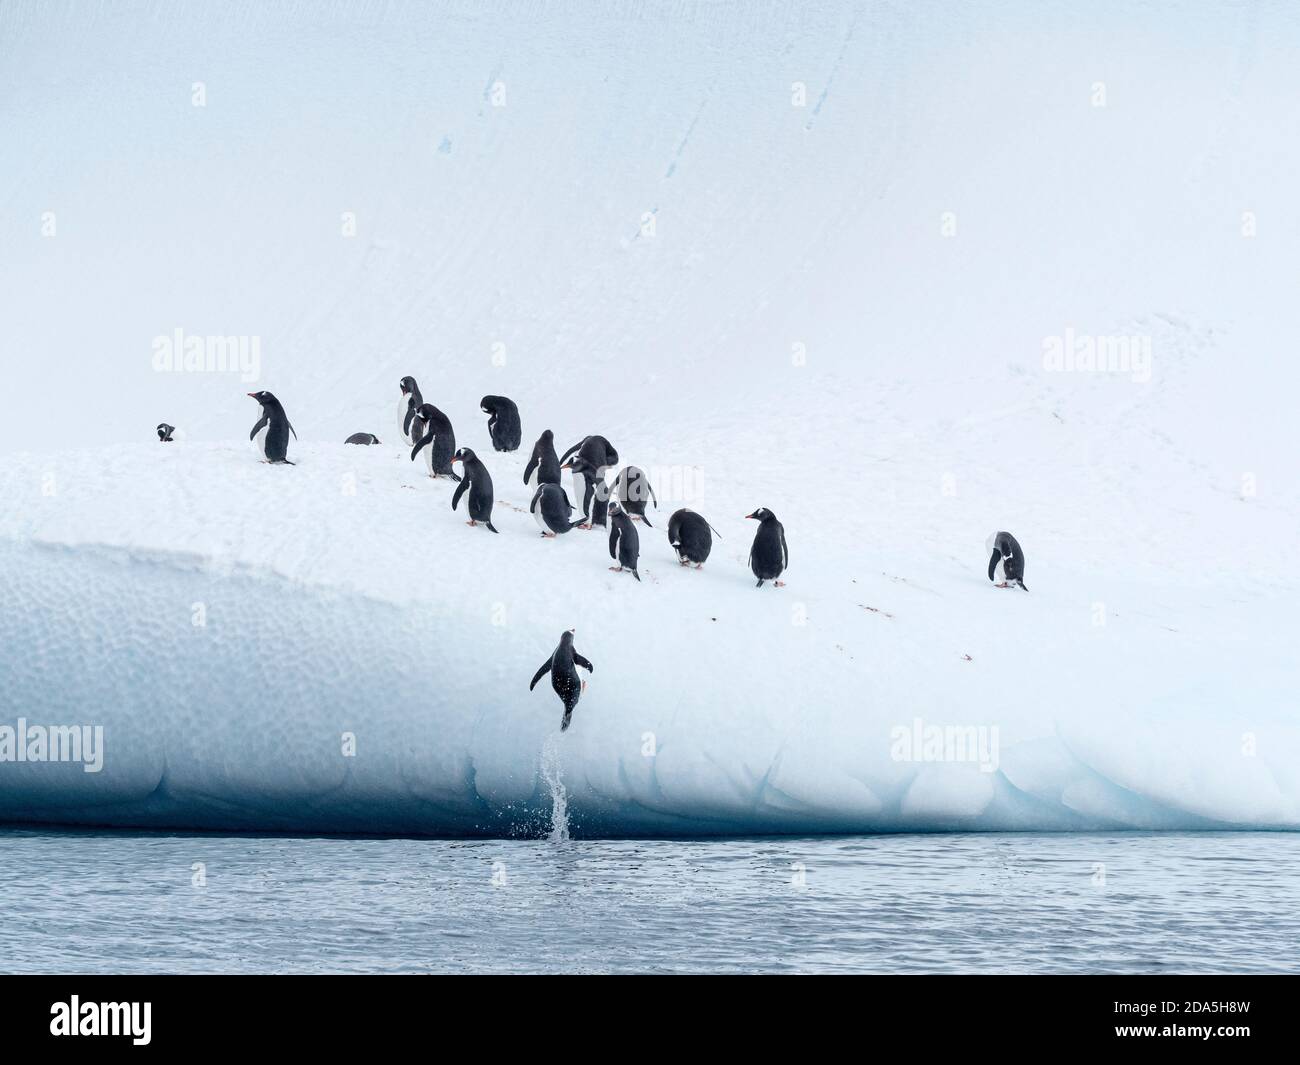 Gentoo penguins, Pygoscelis papua, leaping on ice in the Sprightly Islands, Hughes Bay, Antarctica. Stock Photo